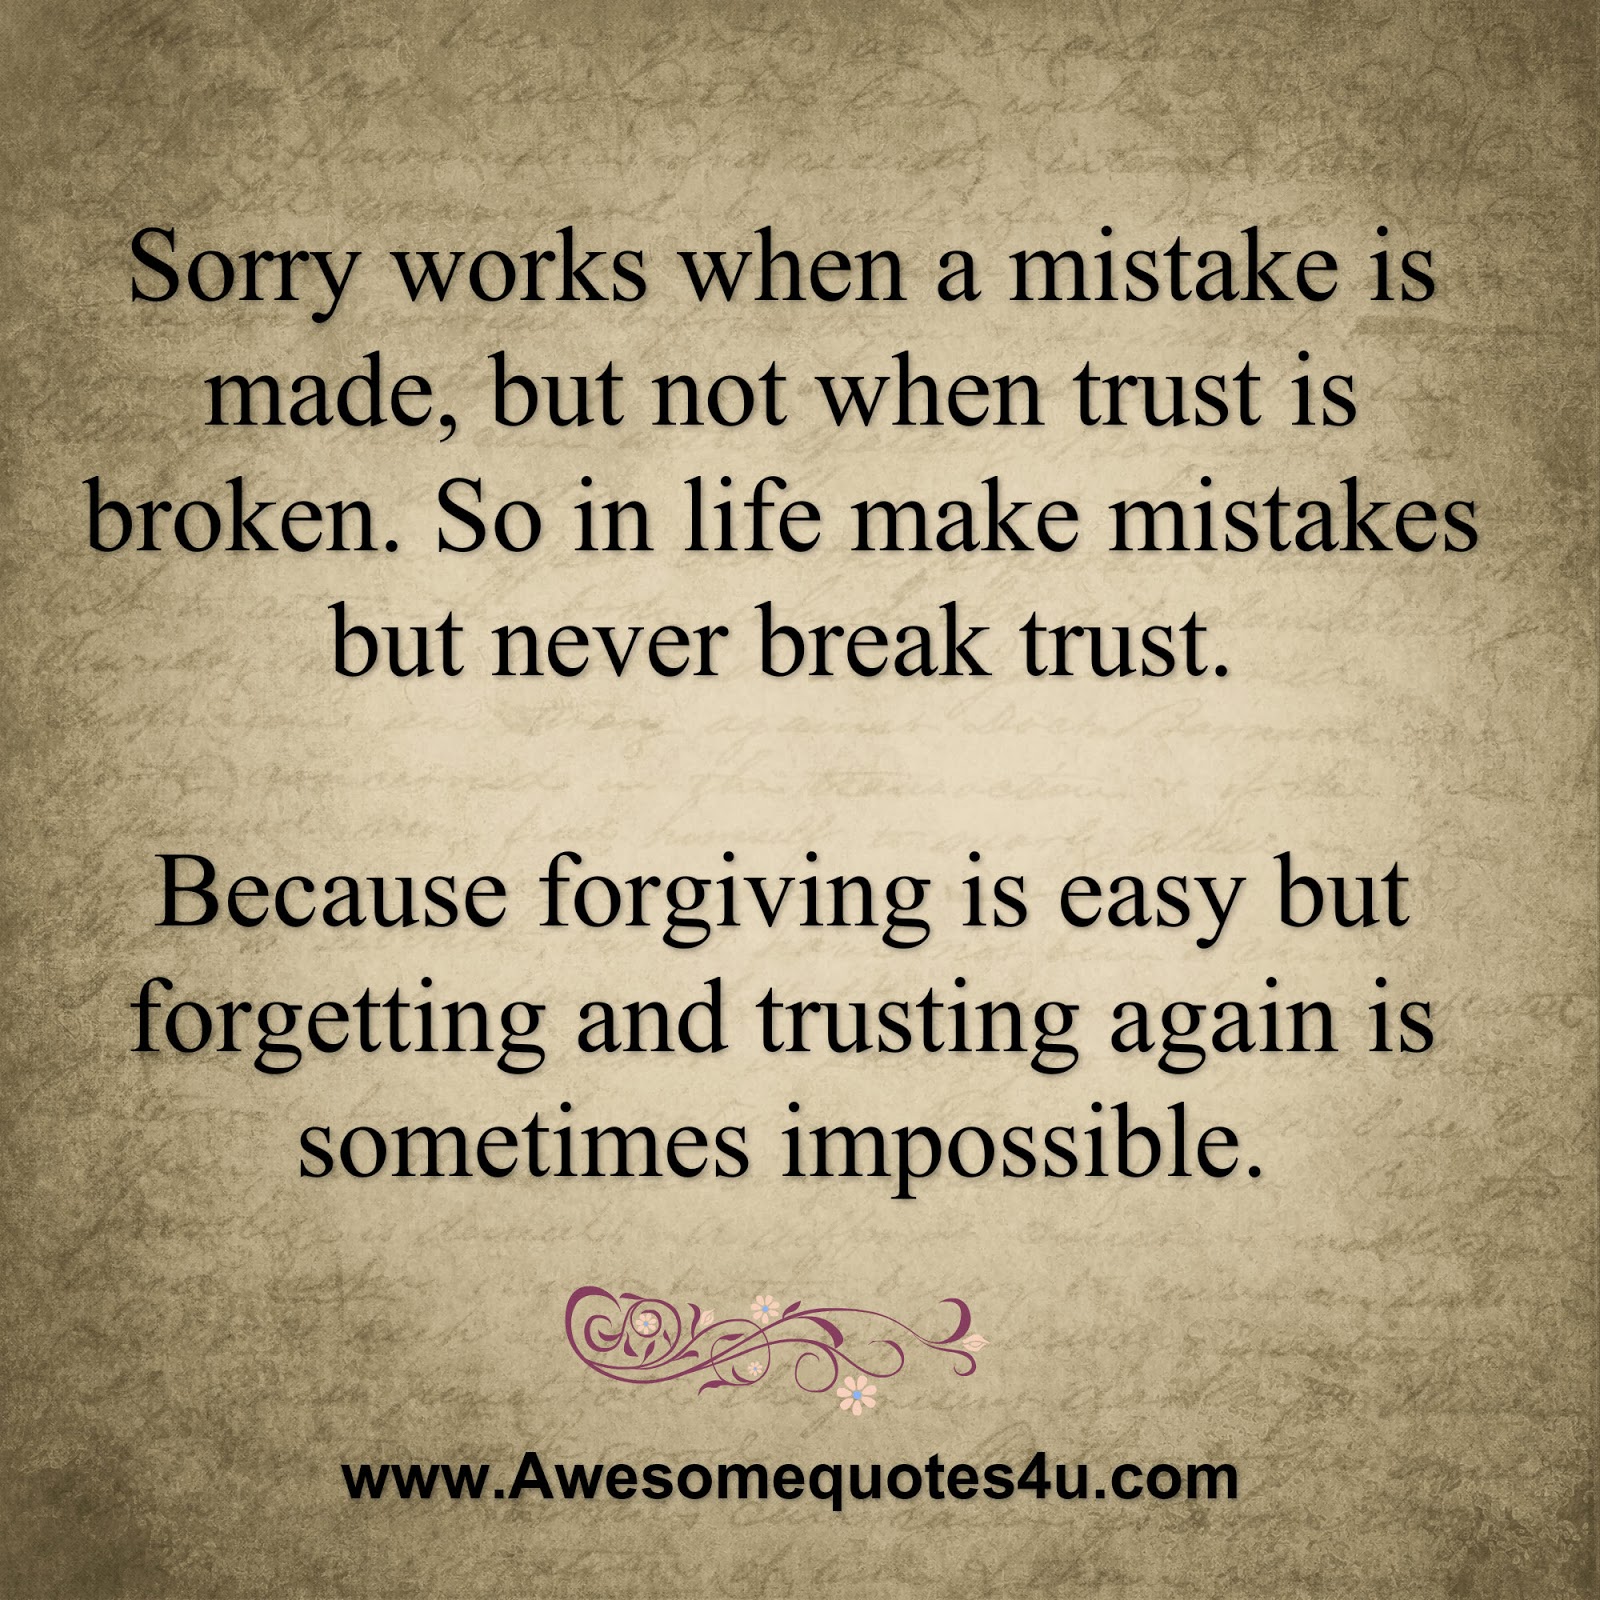 Sorry For Mistake Quotes. QuotesGram